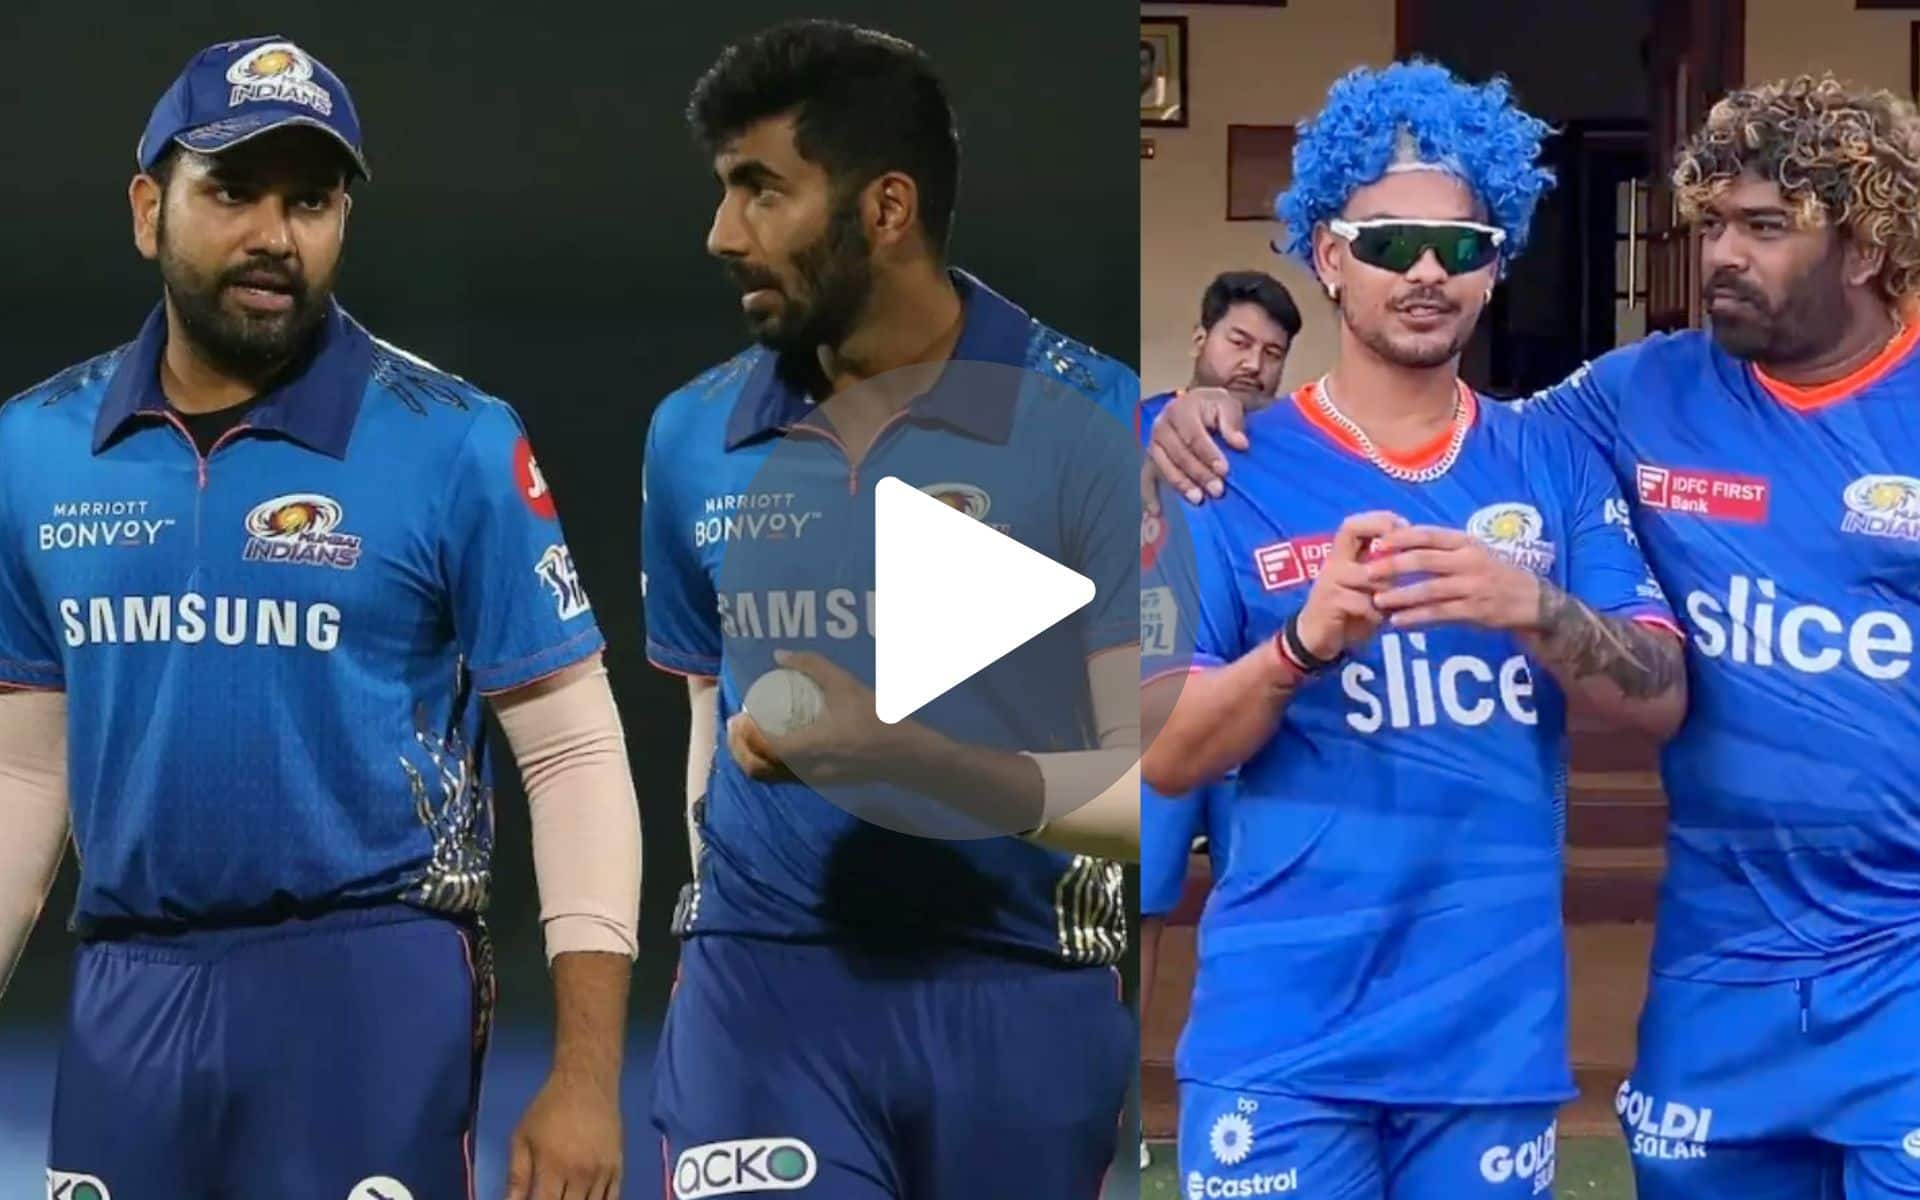 [Watch] Ishan Kishan To Open With Bumrah? Becomes Lasith Malinga In A Viral Video